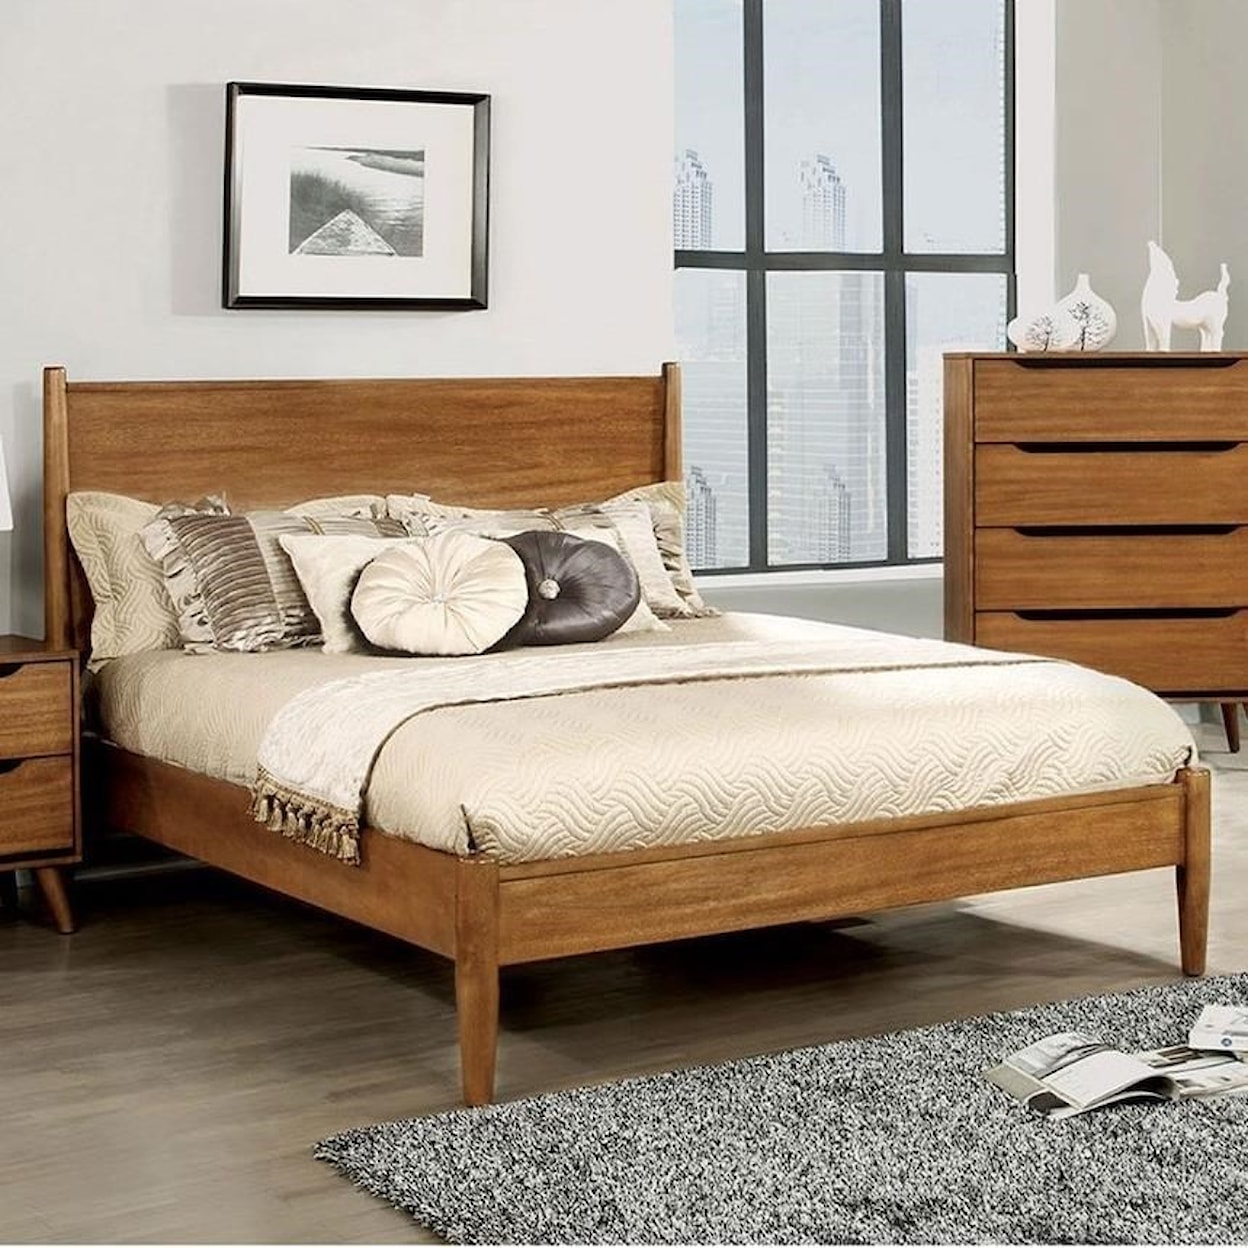 Furniture of America Lennart King Bed